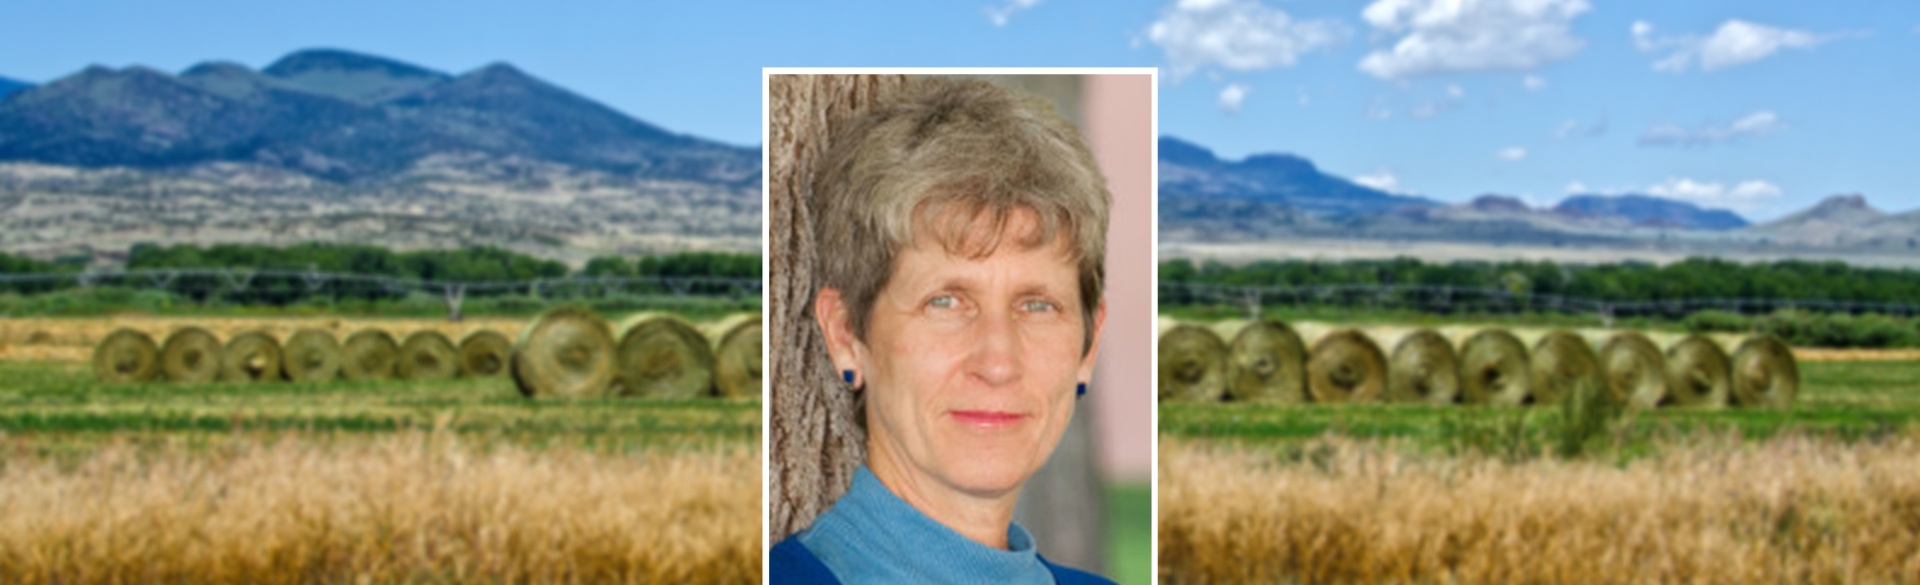 Woman in headshot on background of Colorado mountains